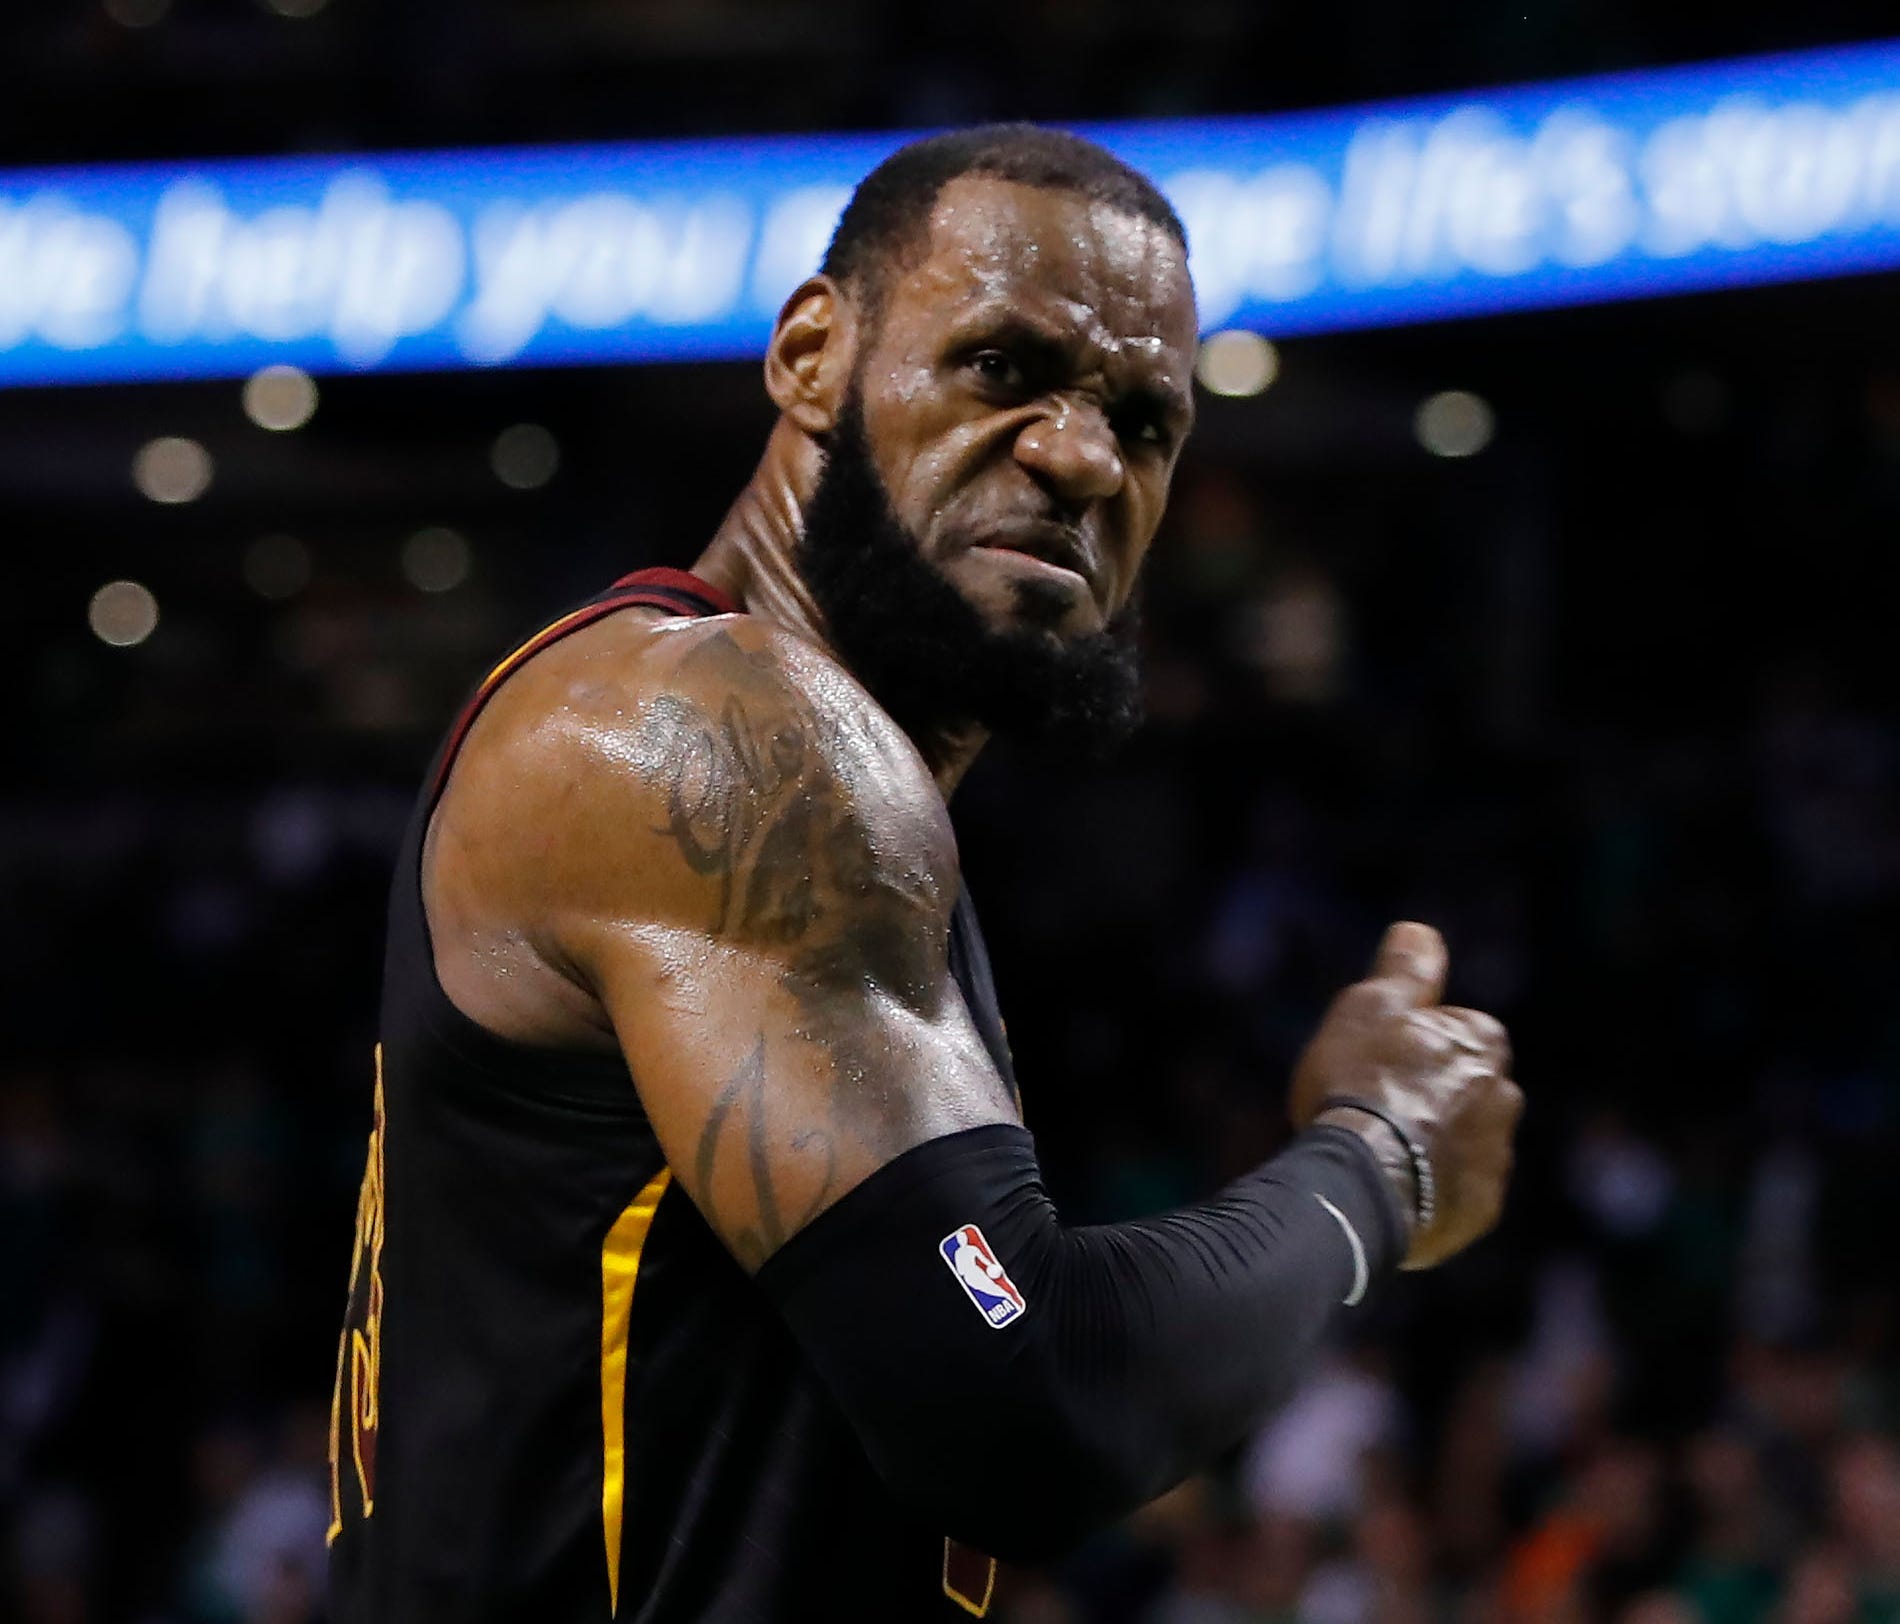 LeBron James is among the greatest players in NBA history, that much is clear.